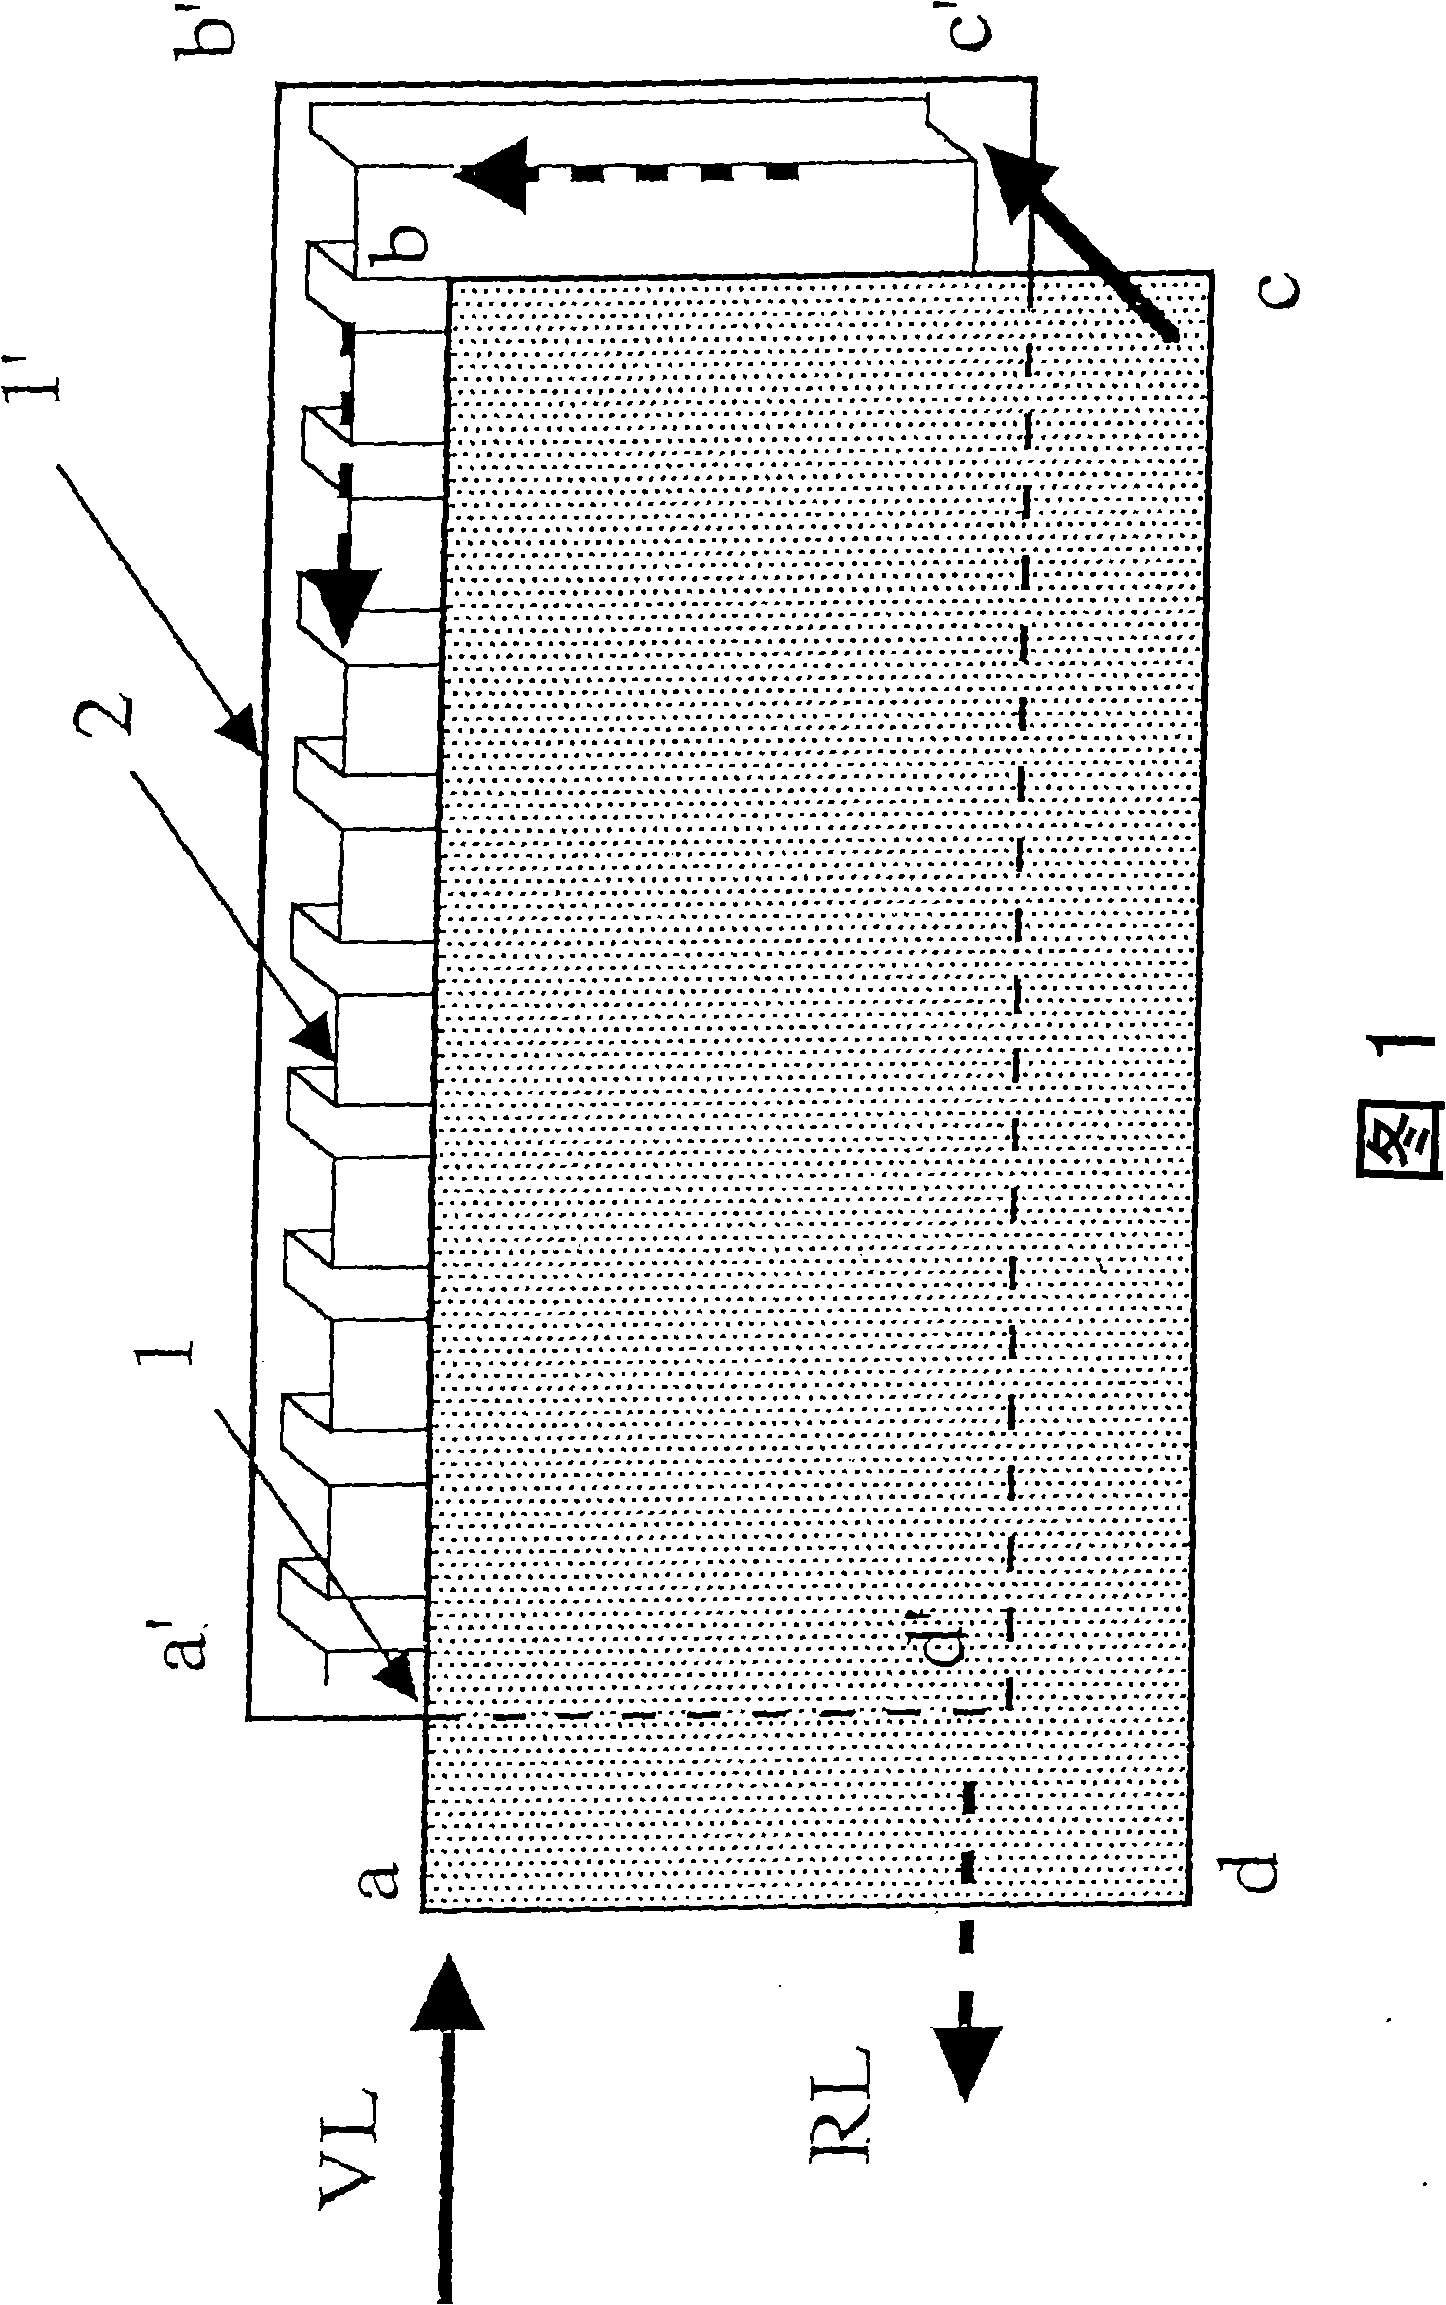 Single-row or multi-row heating body containing at least two different sections